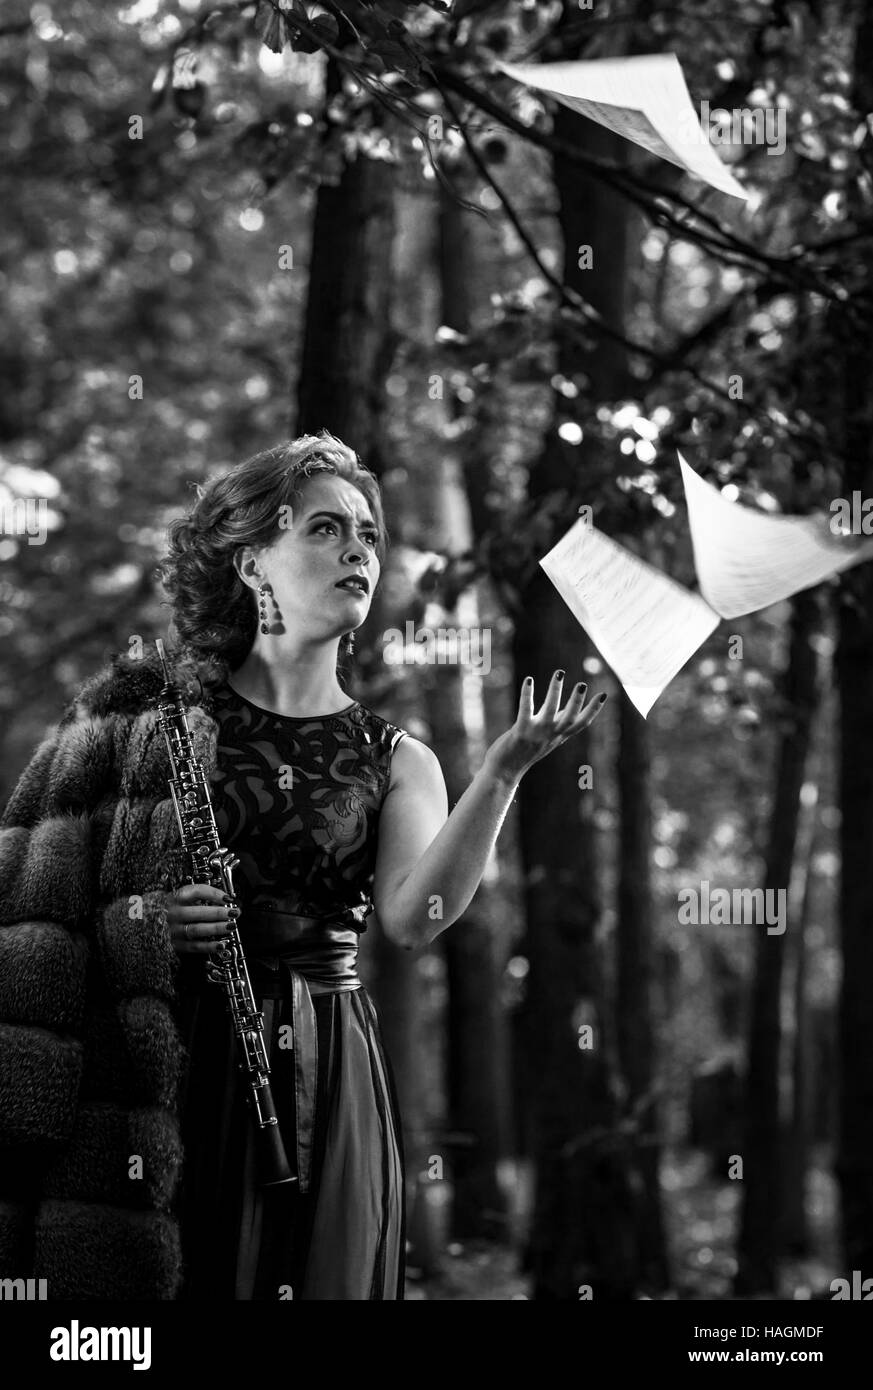 Black and white portrait of young emotional woman throwing away the musical sheets and holding an oboe in hand Stock Photo